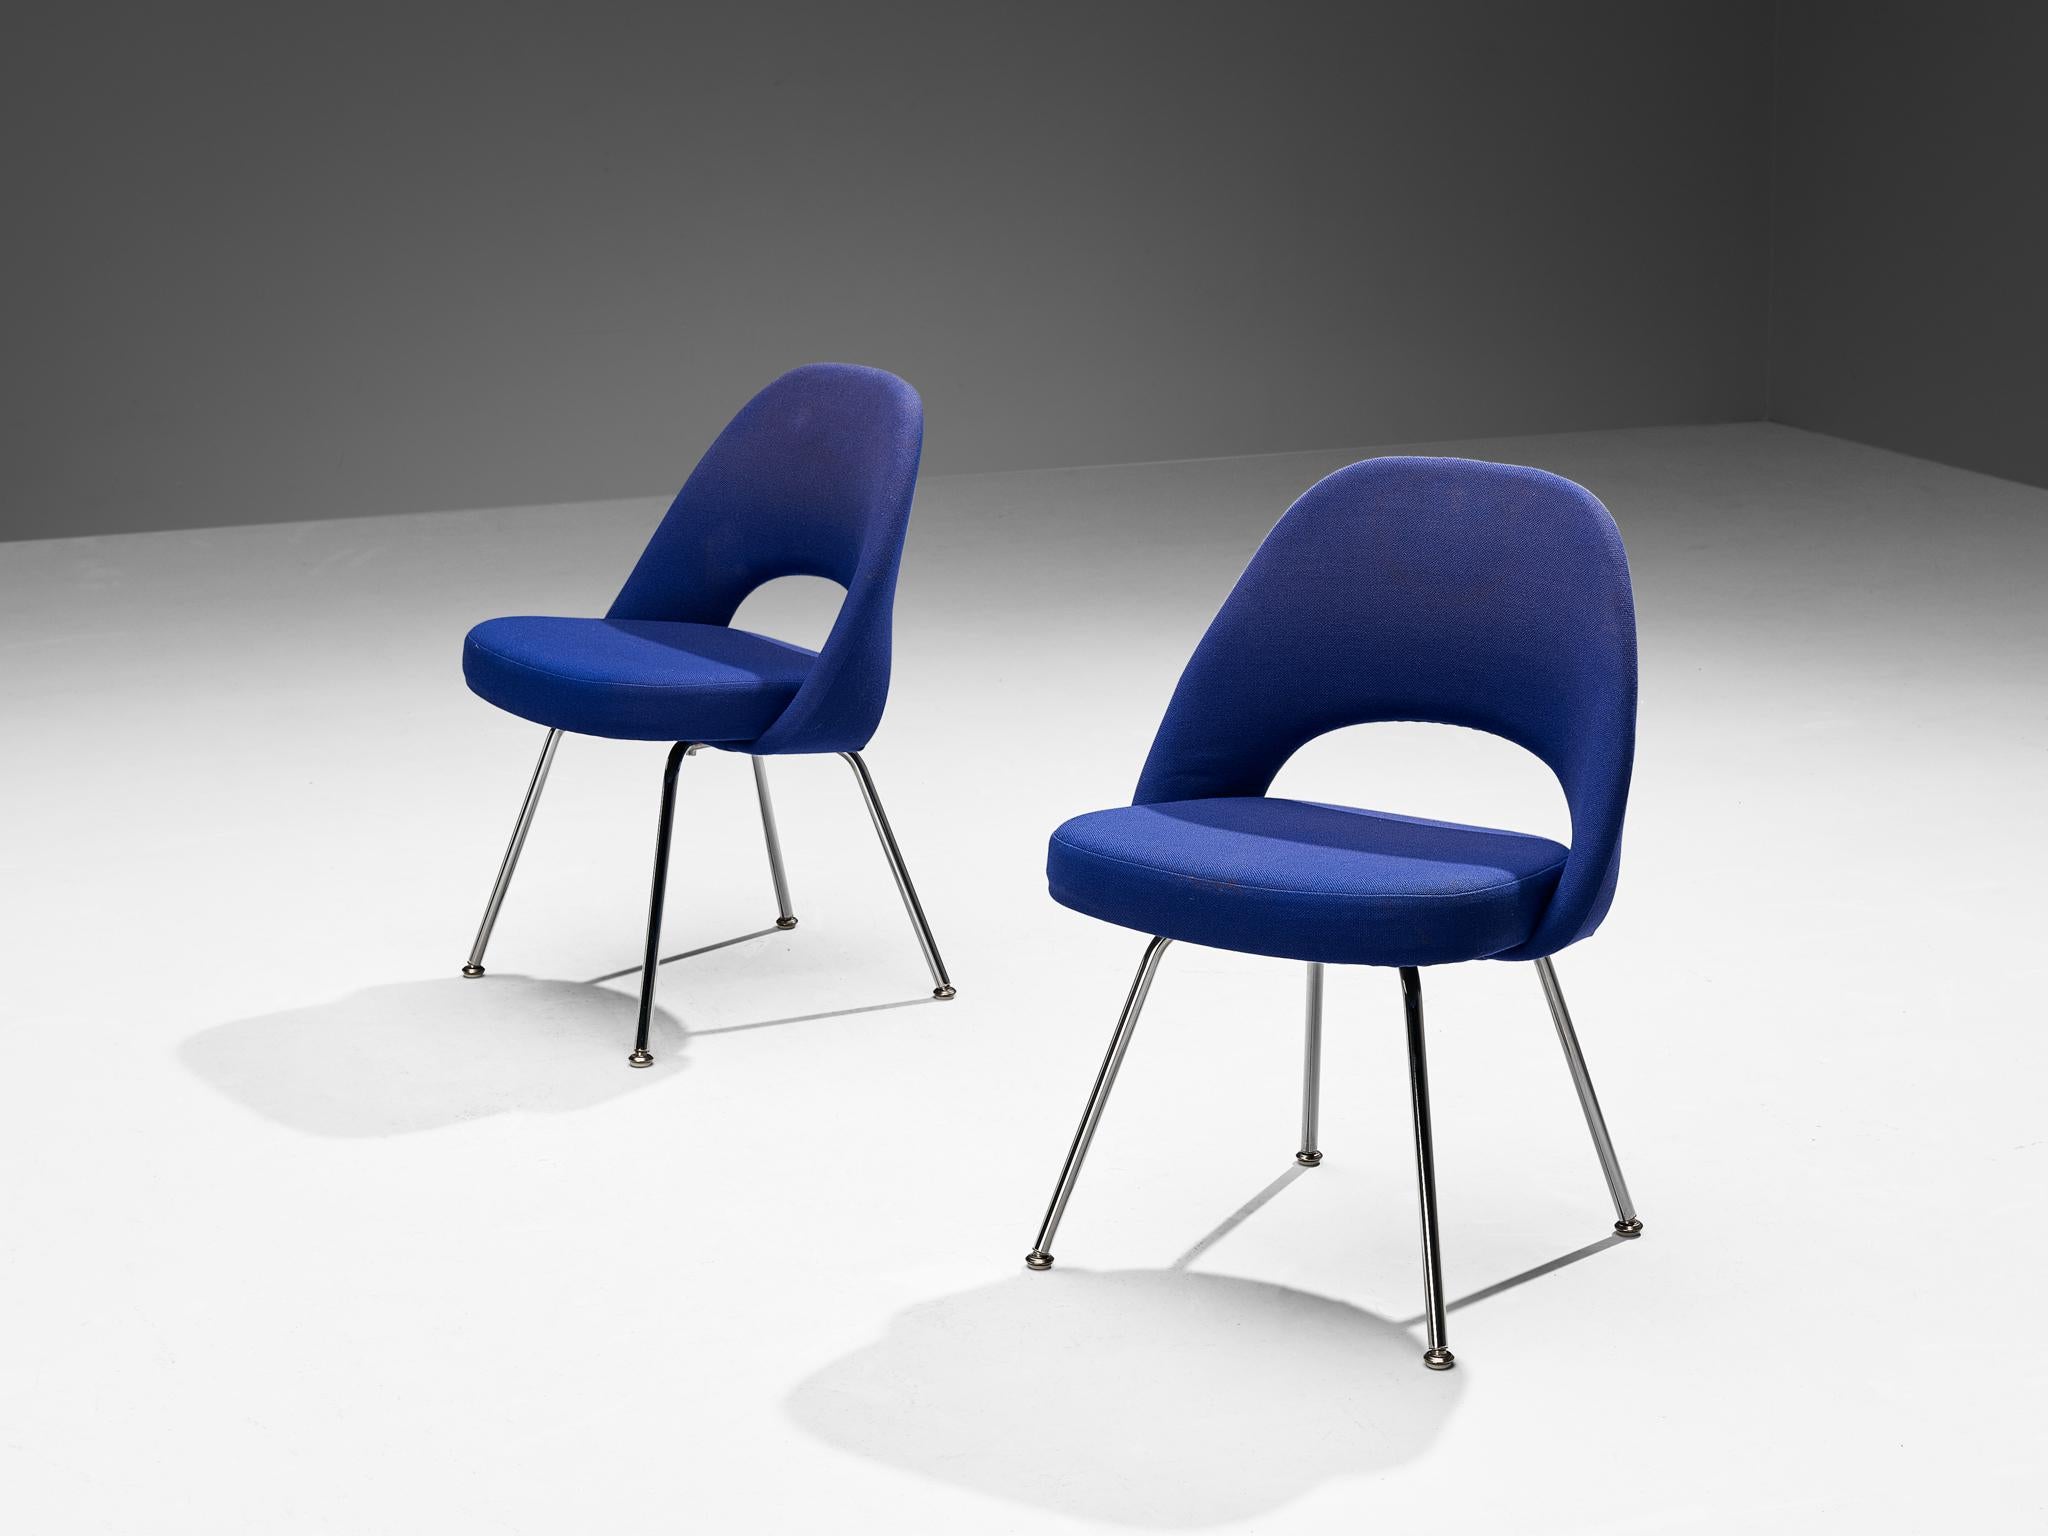 Eero Saarinen for Knoll Set of Four Dining Chairs in Blue Upholstery  (Mitte des 20. Jahrhunderts) im Angebot